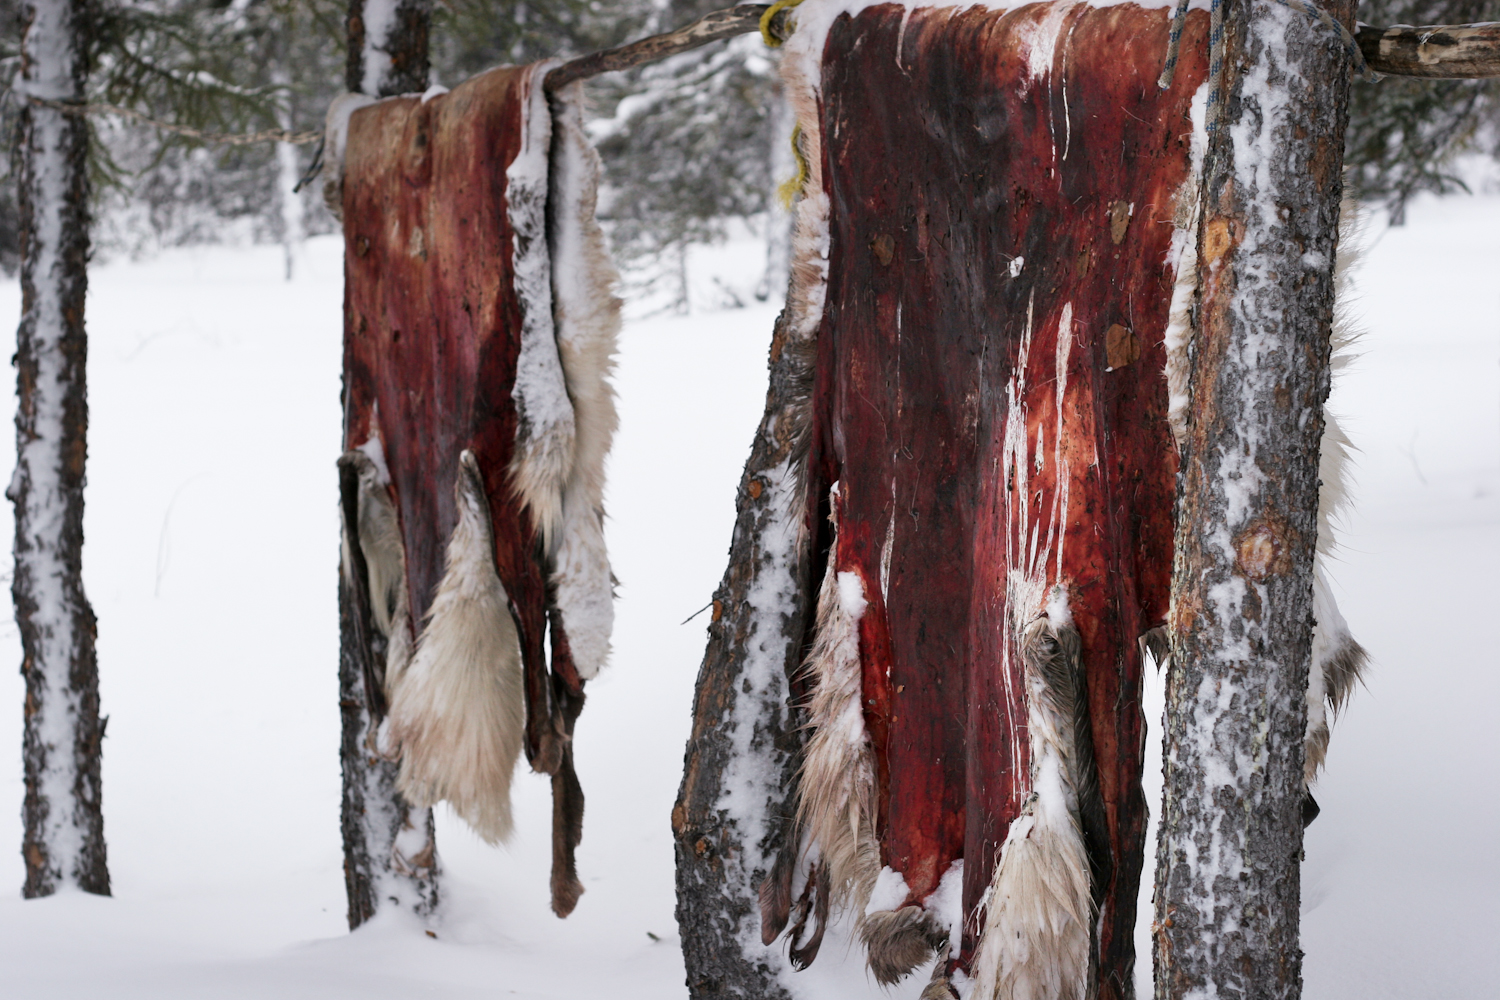   Within the pines, hunters shoot the local game of caribou, moose, tarnegin, rabbit, and wolf. “A caribou migration trail runs right through my backyard,” said Luke Wood who shot the Caribou whose skins hang between the trees outside his canvas and 